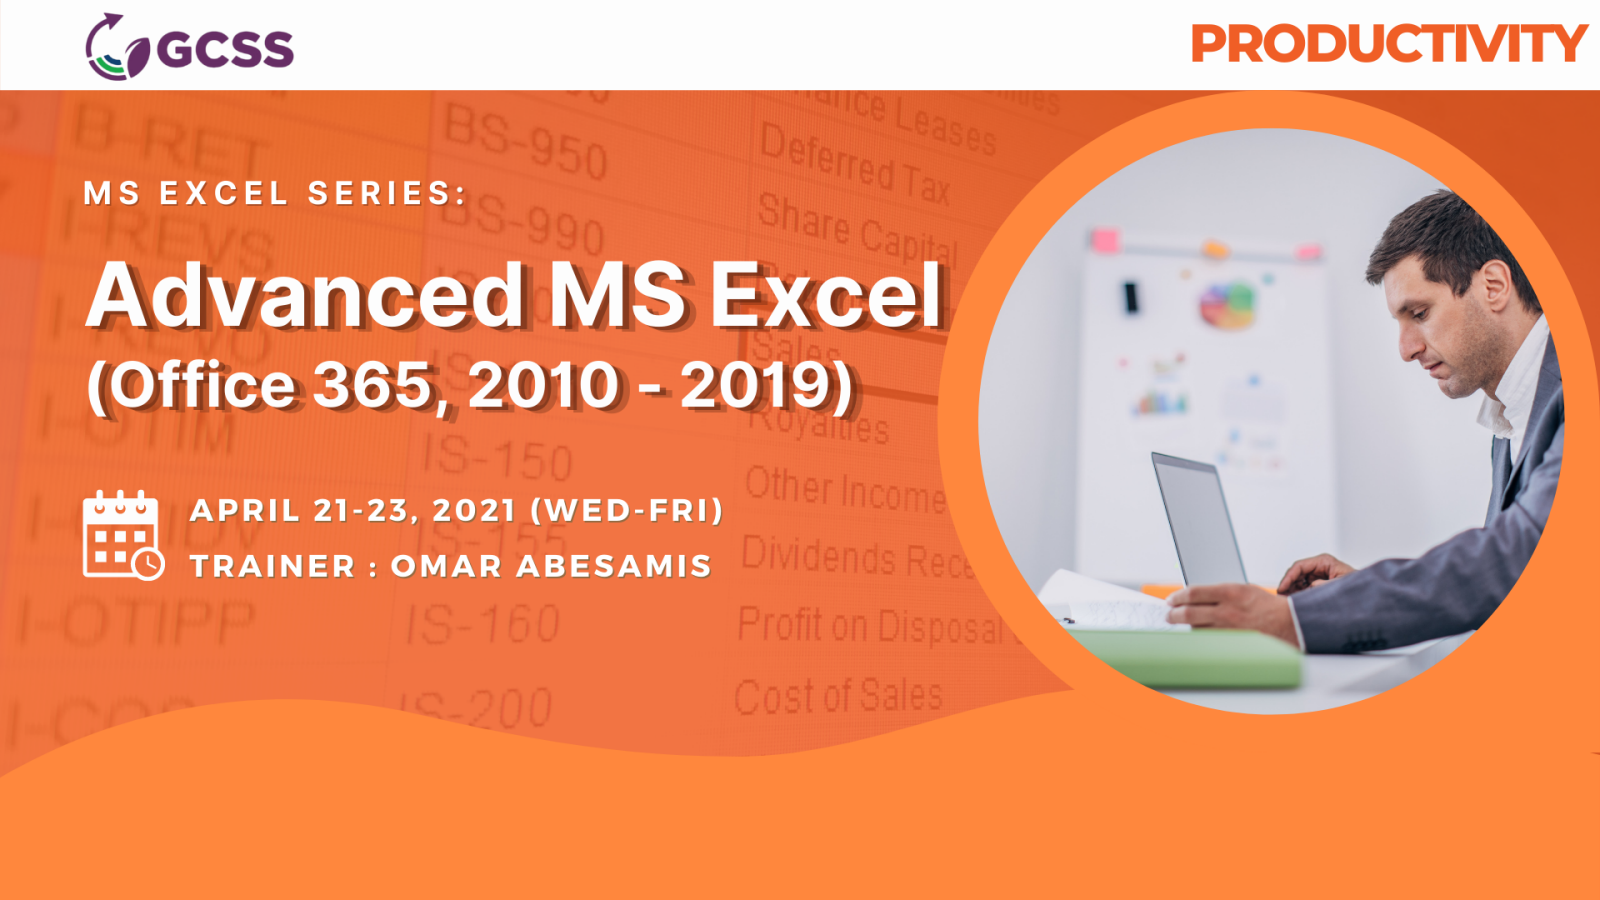 Advanced MS Excel (Office 365, 2010-2019), Manila, National Capital Region, Philippines